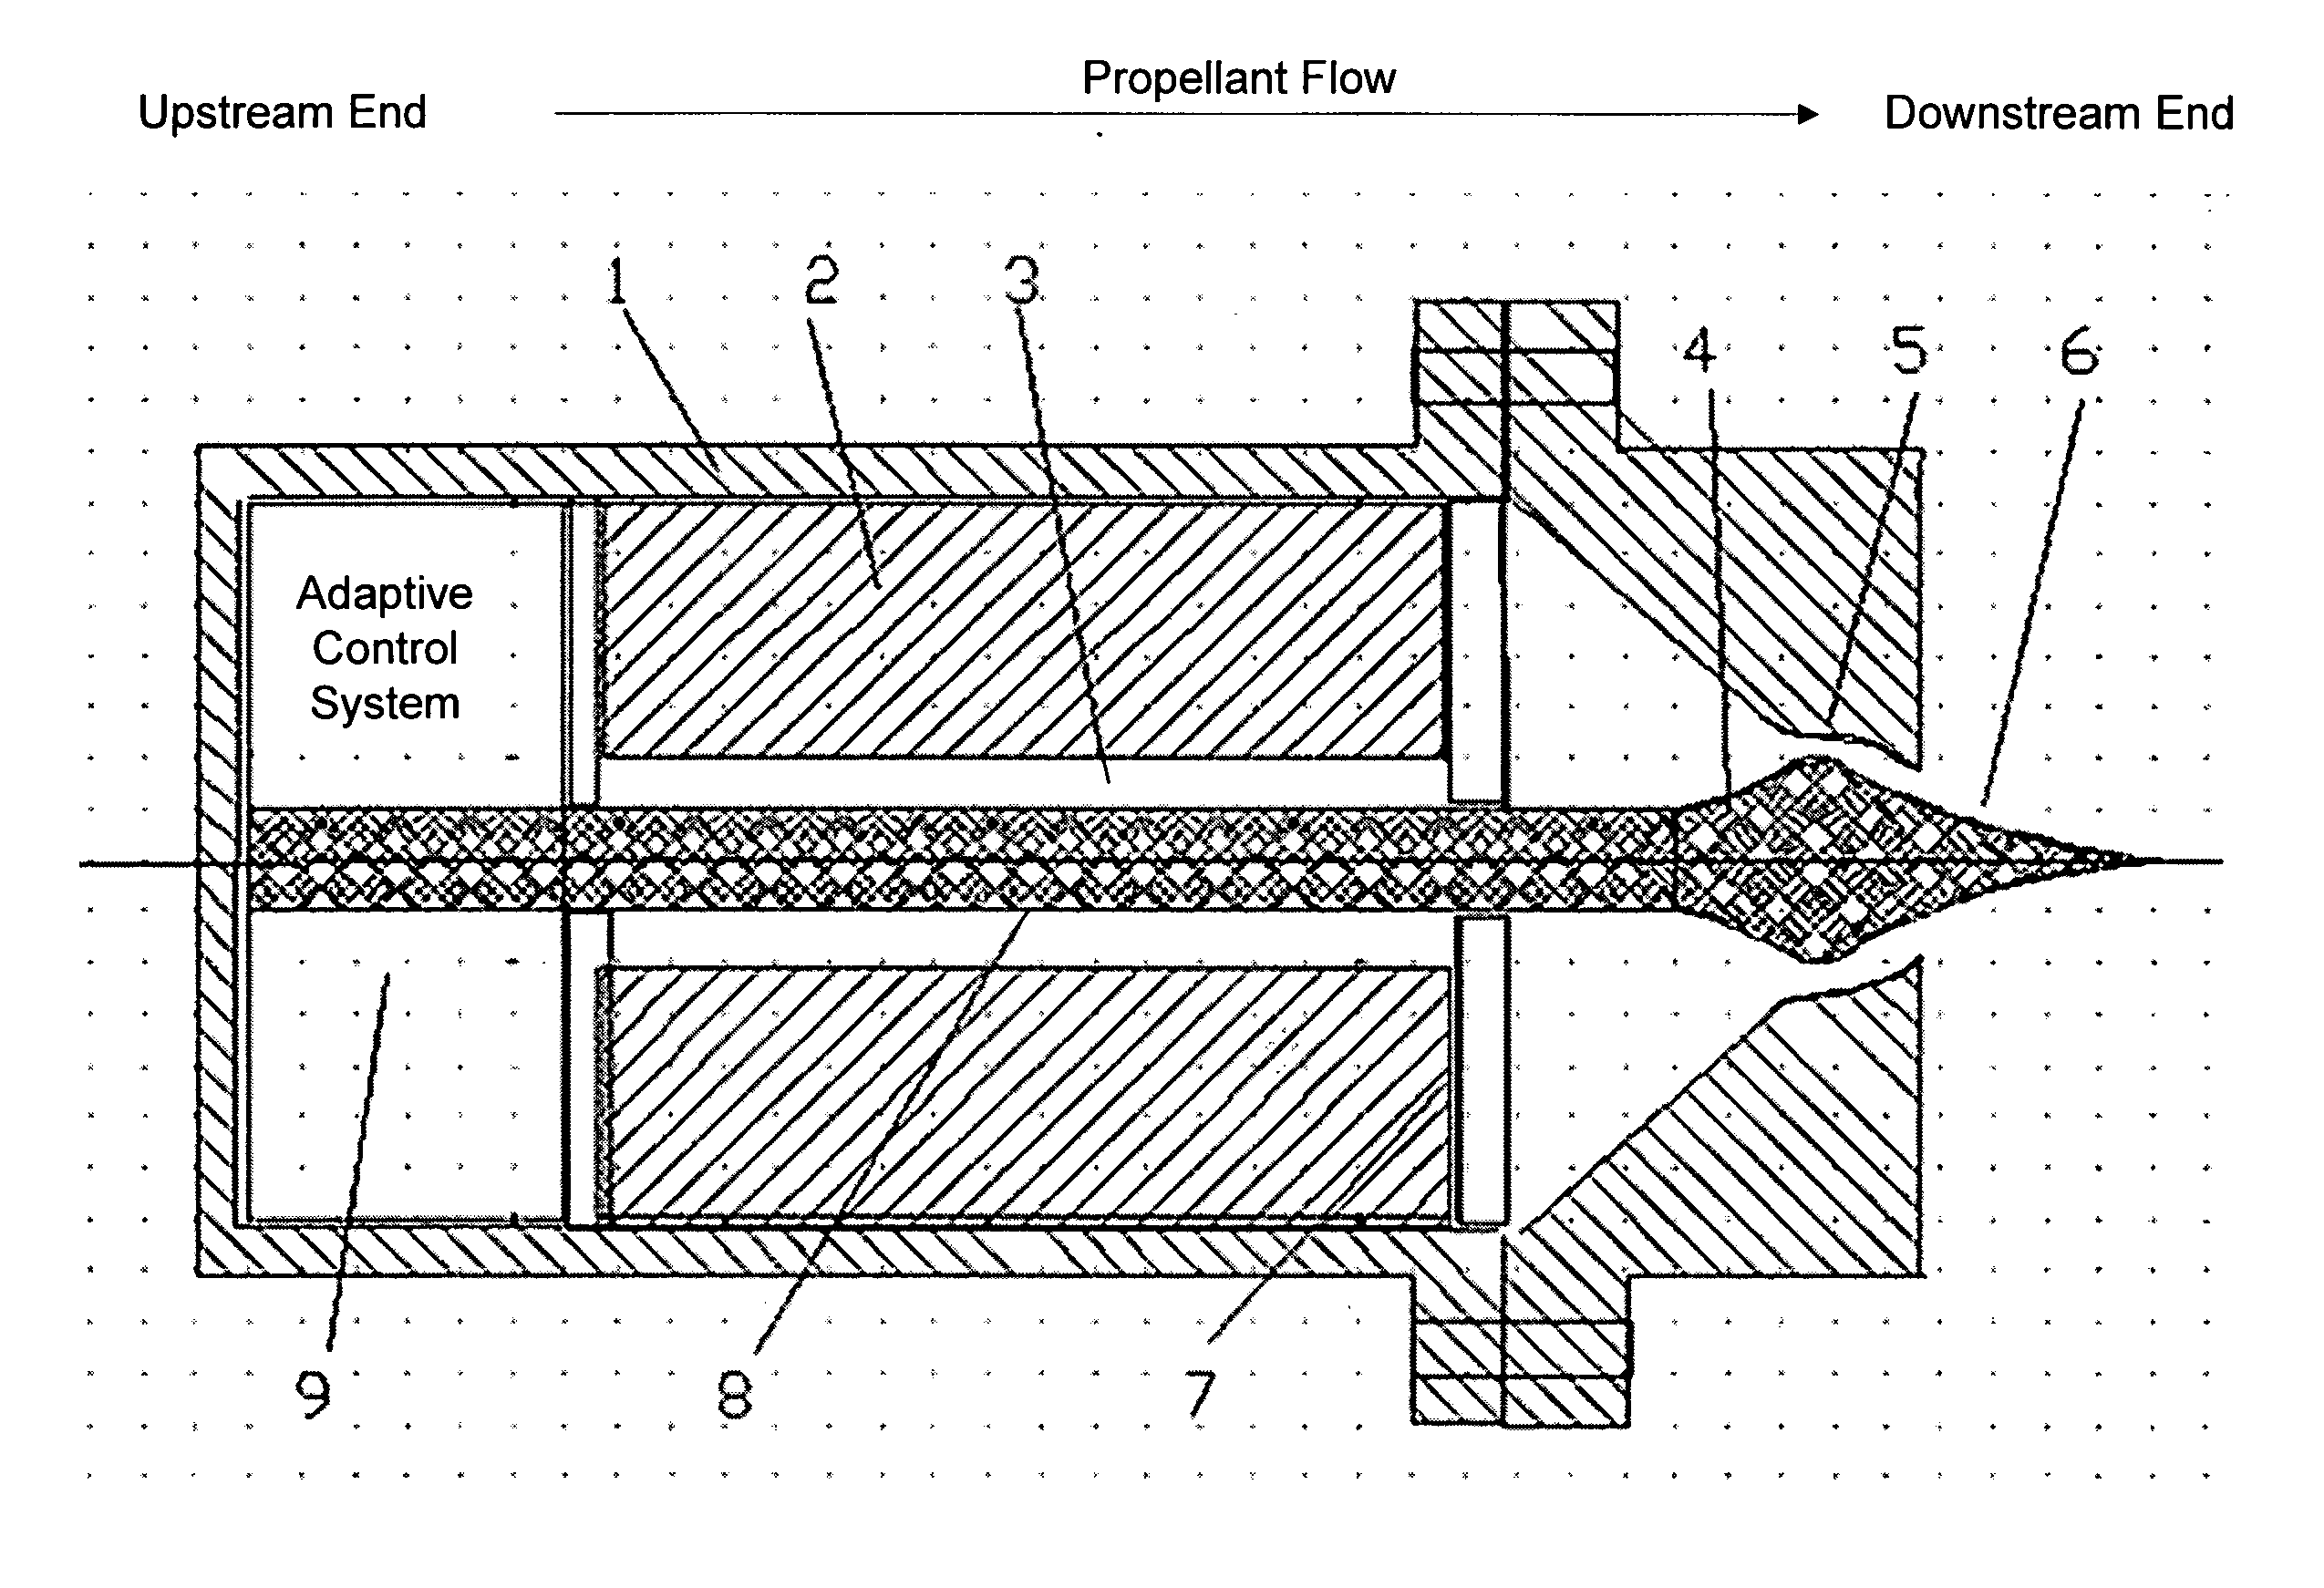 Systems and methods for varying the thrust of rocket motors and engines while maintaining higher efficiency using moveable plug nozzles